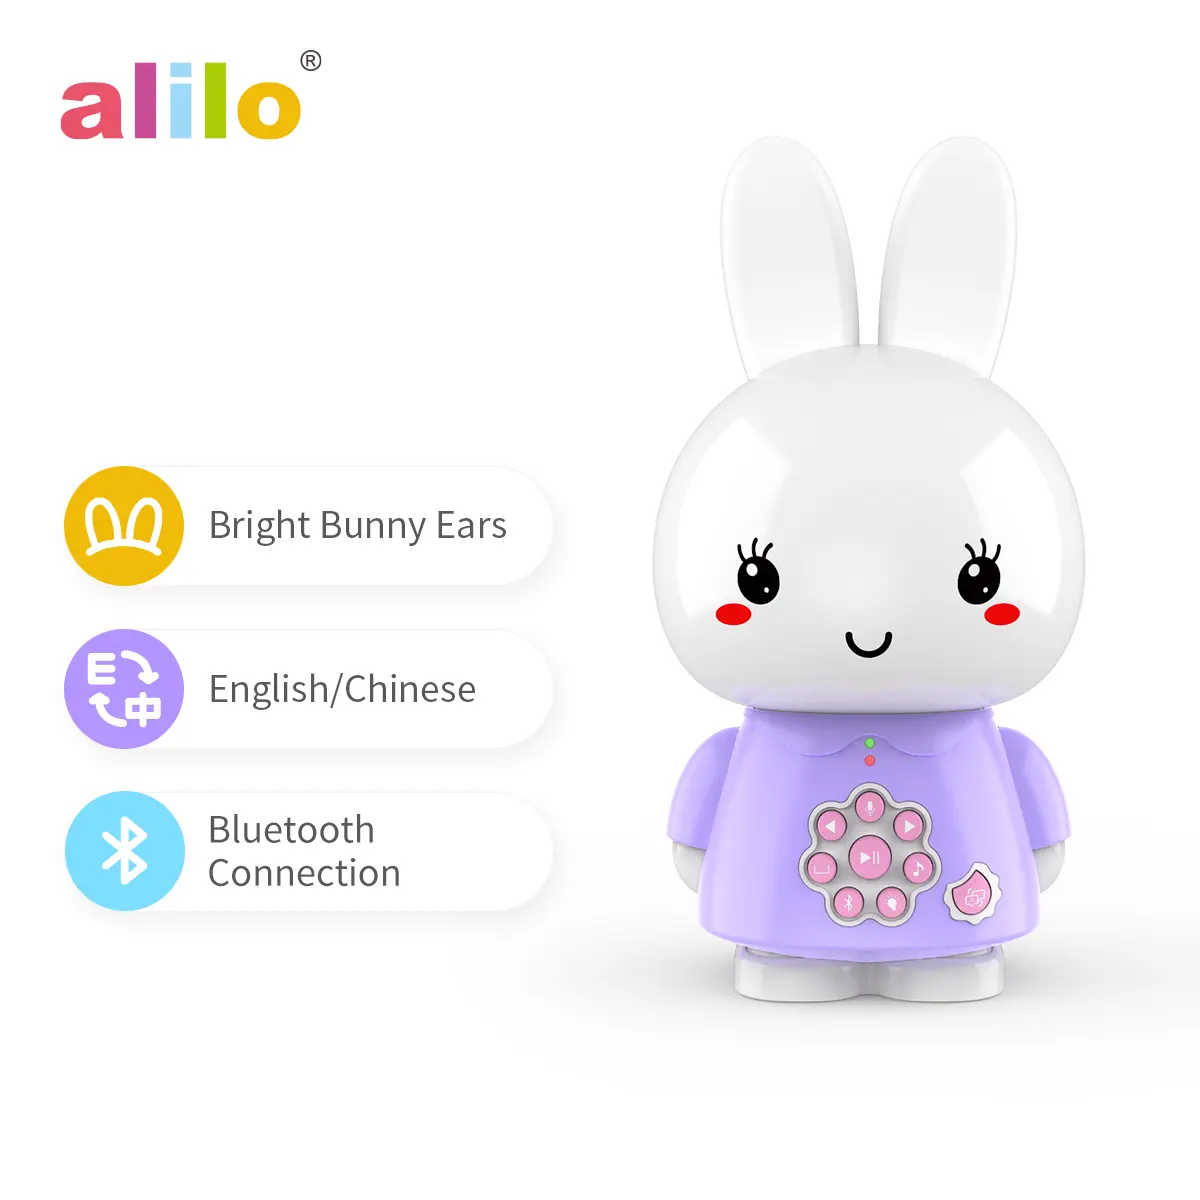 Blue Alilo G6X Honey Bunny Interactive Smart Story Teller & Lullaby Song 